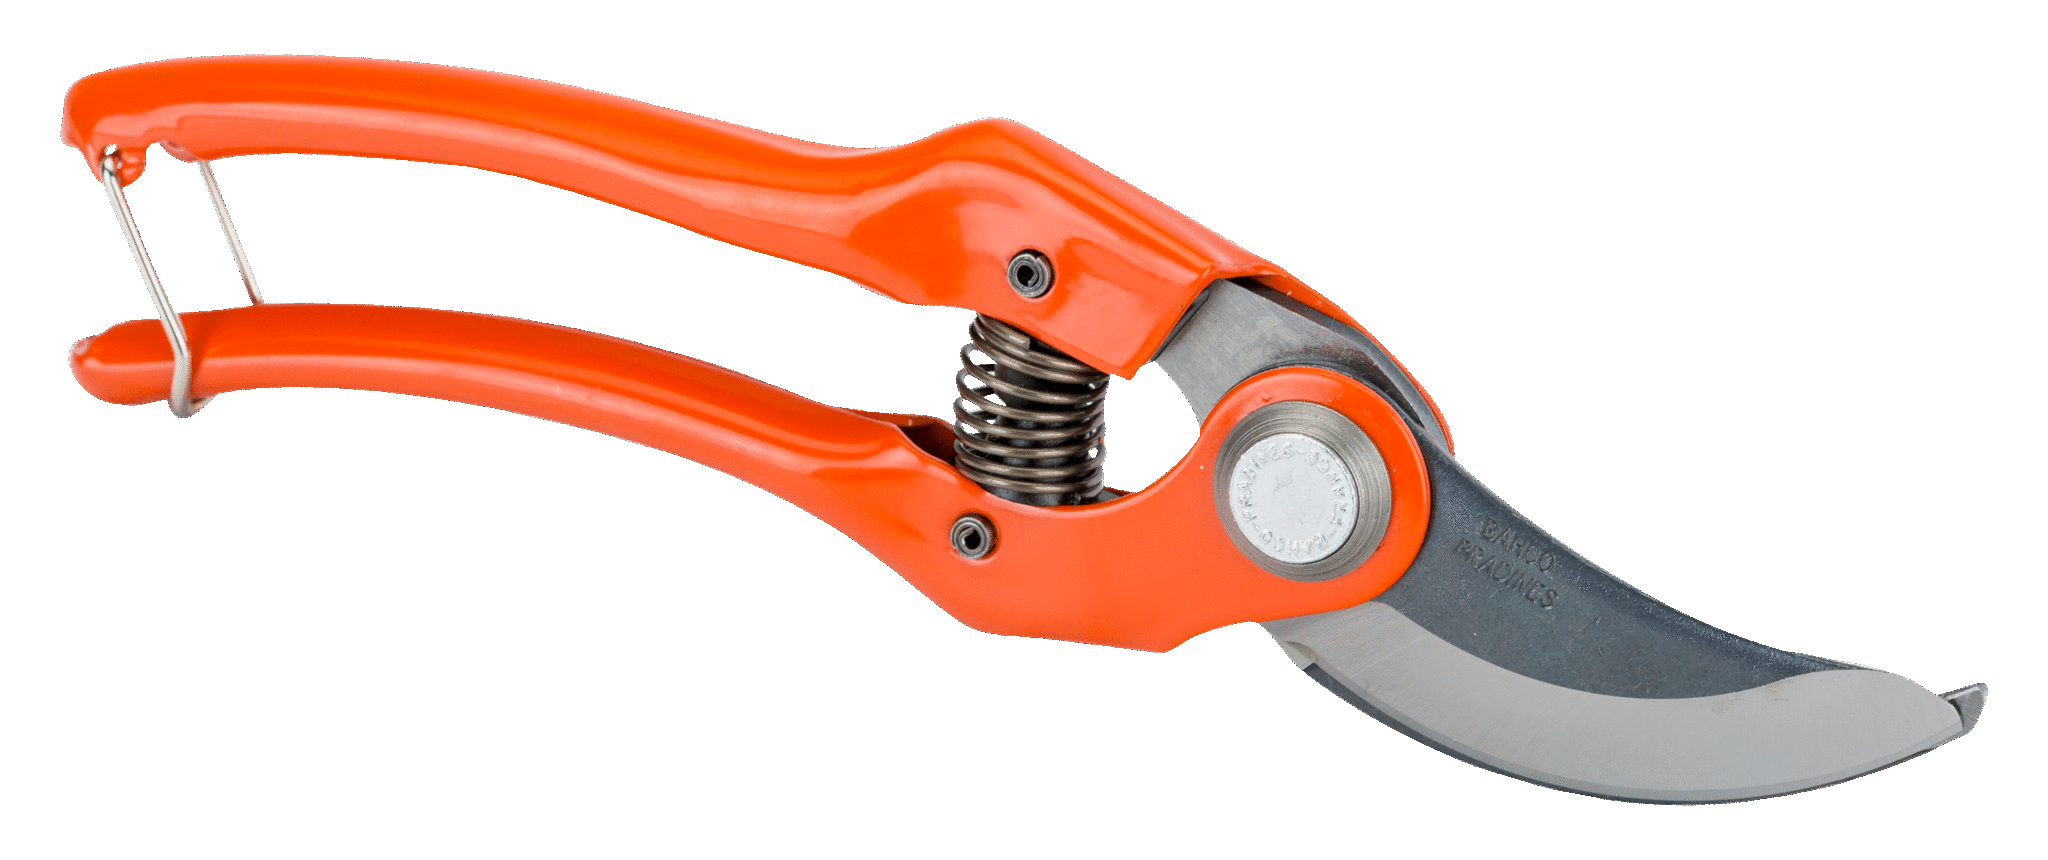 Bypass Secateurs with Stamped/Pressed Steel Handle and Angled Cutting Head